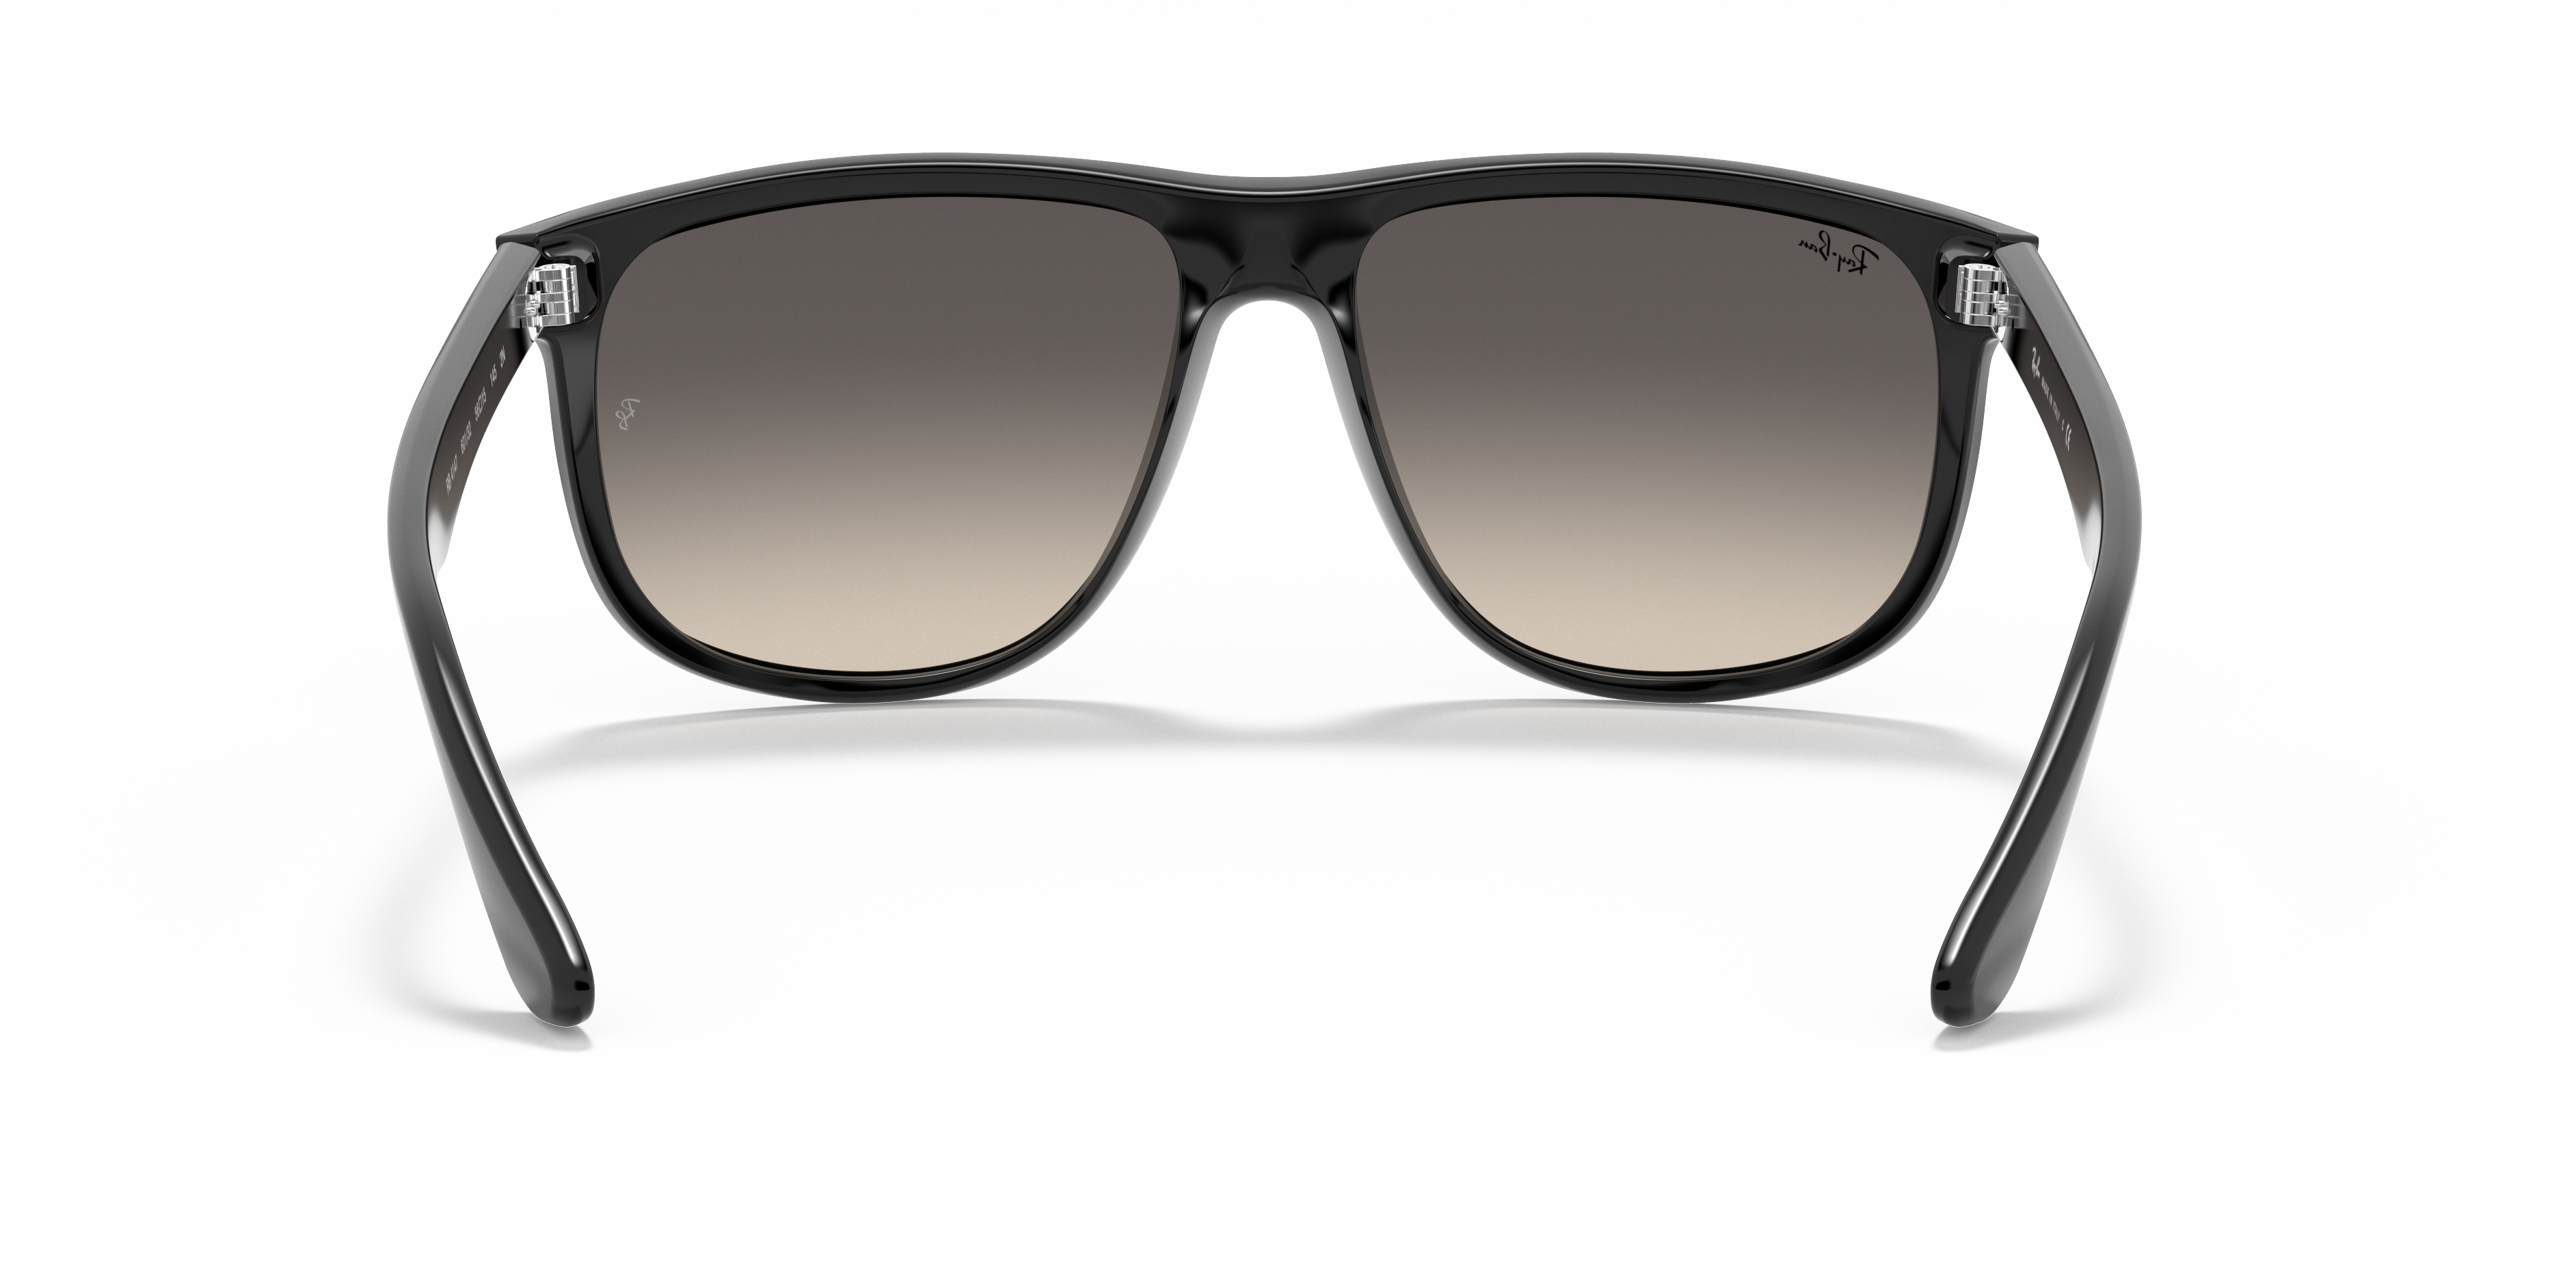 Rb4147 Sunglasses in Black and Light Grey | Ray-Ban®